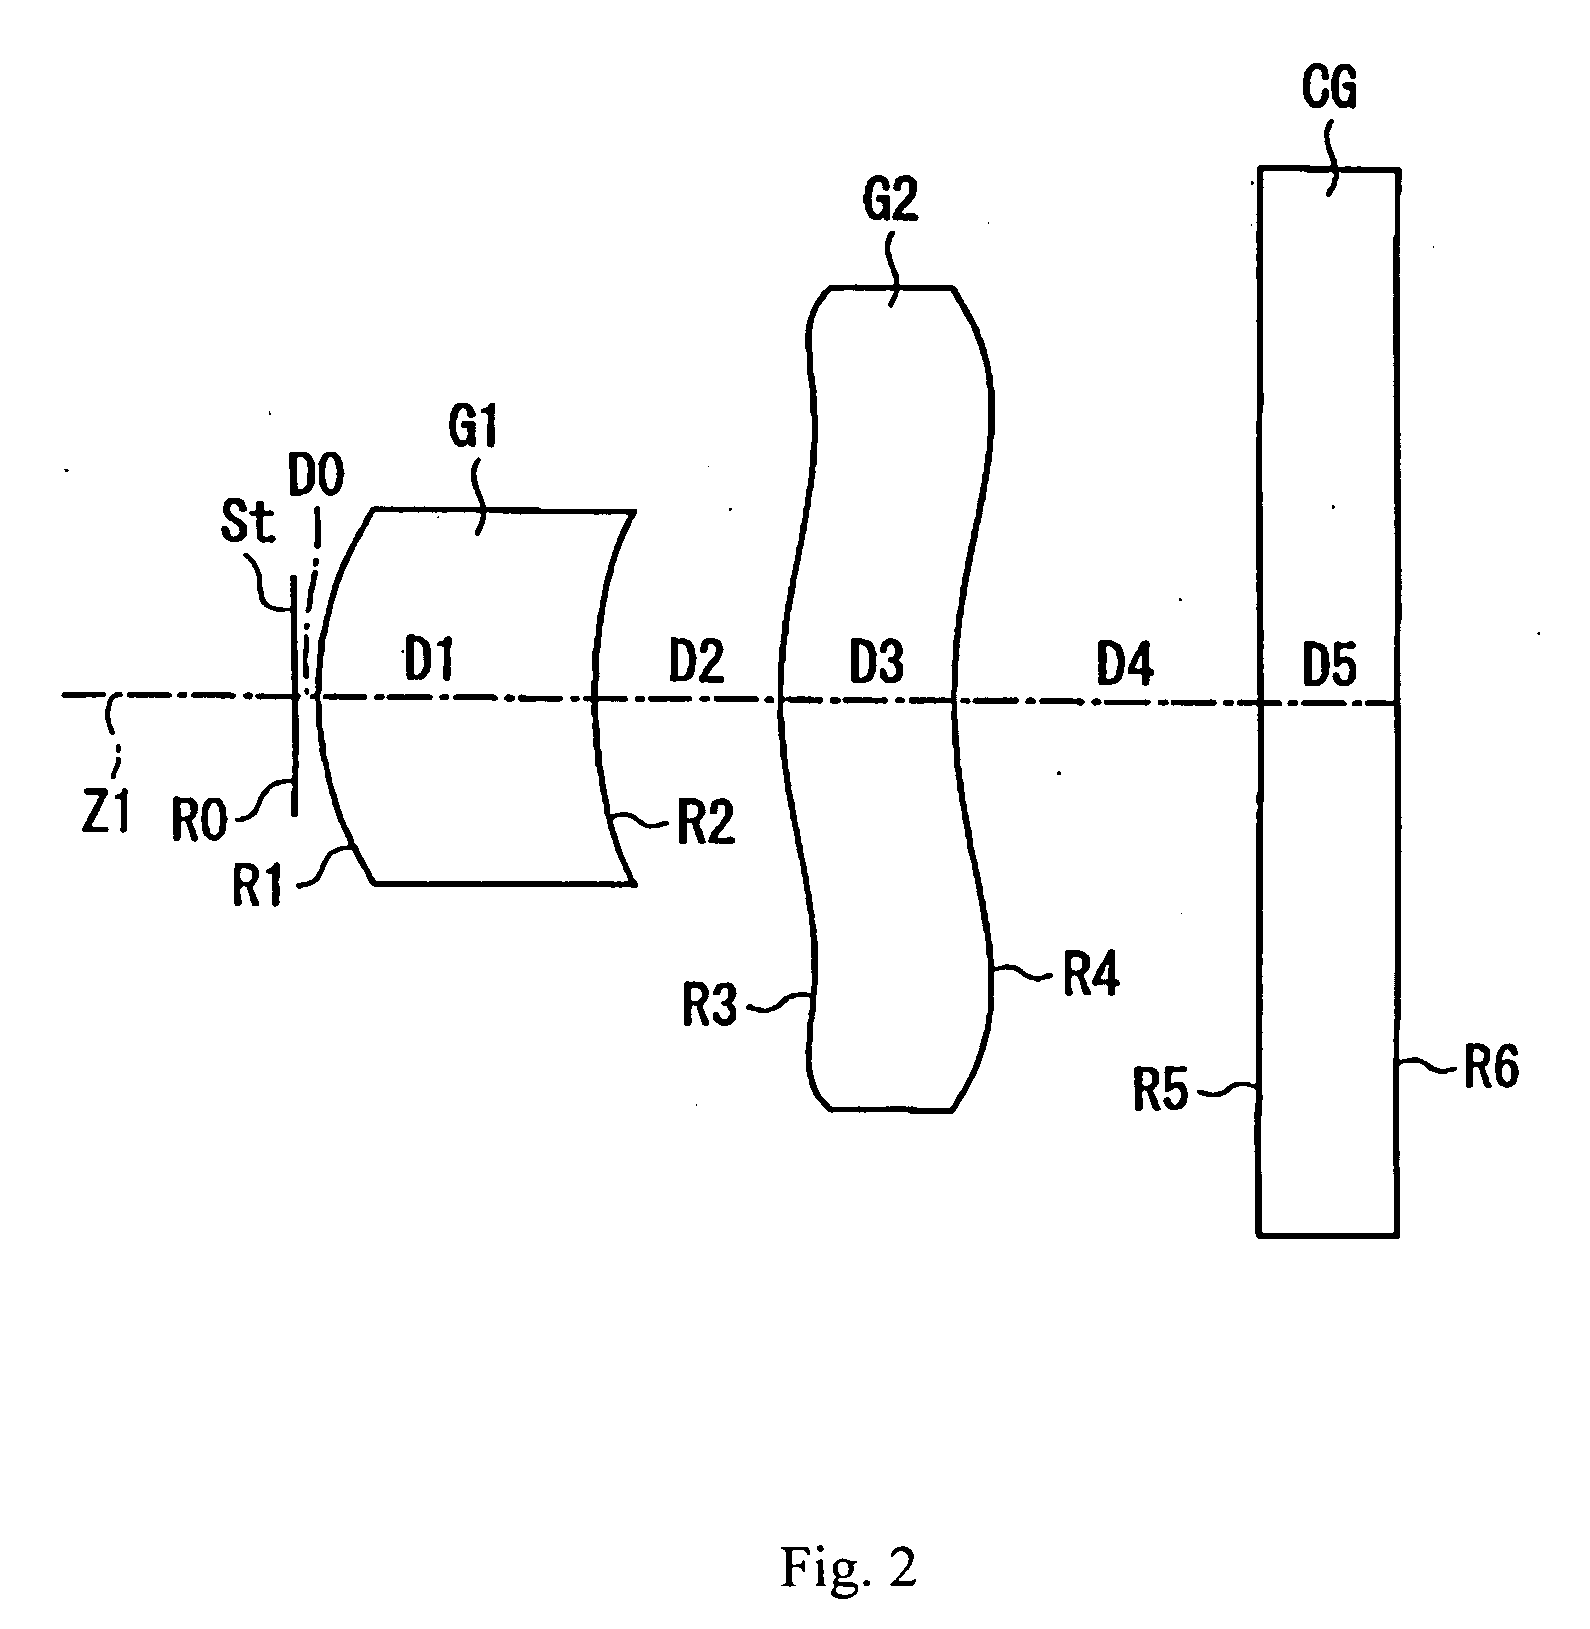 Optical system with particular optical distortion